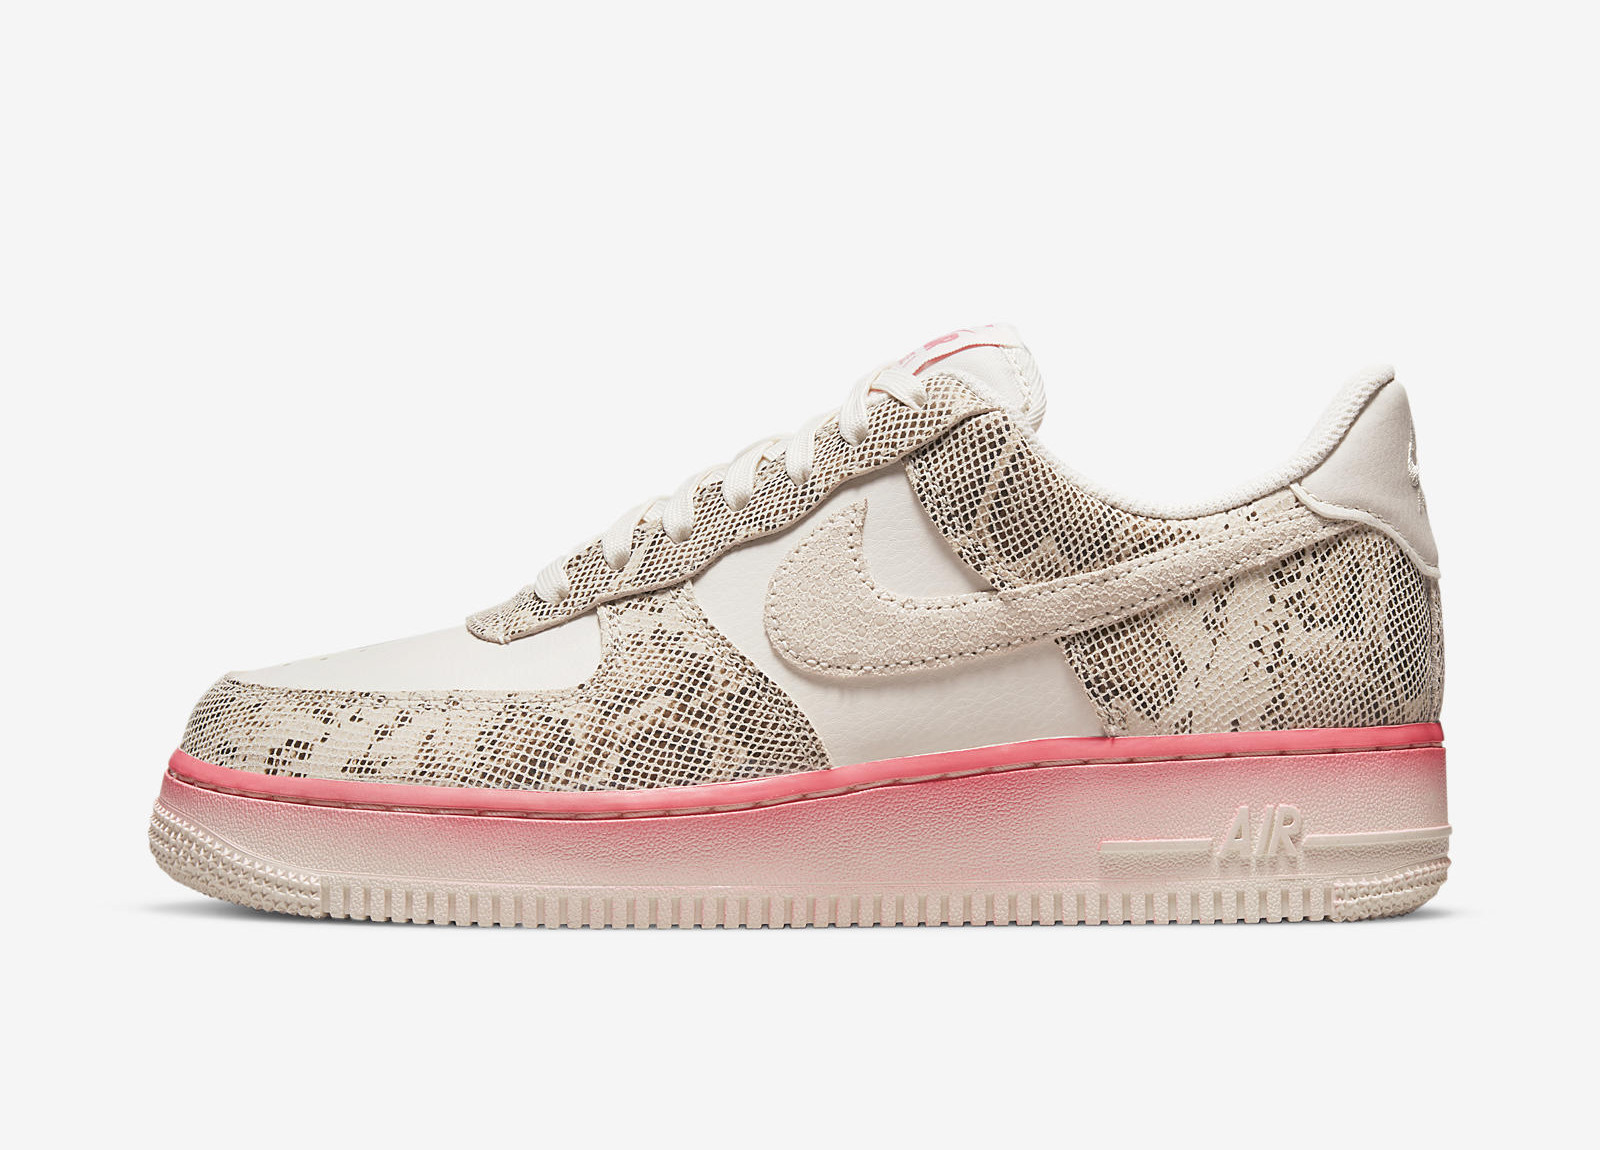 Nike Air Force 1
« Our Force 1 »